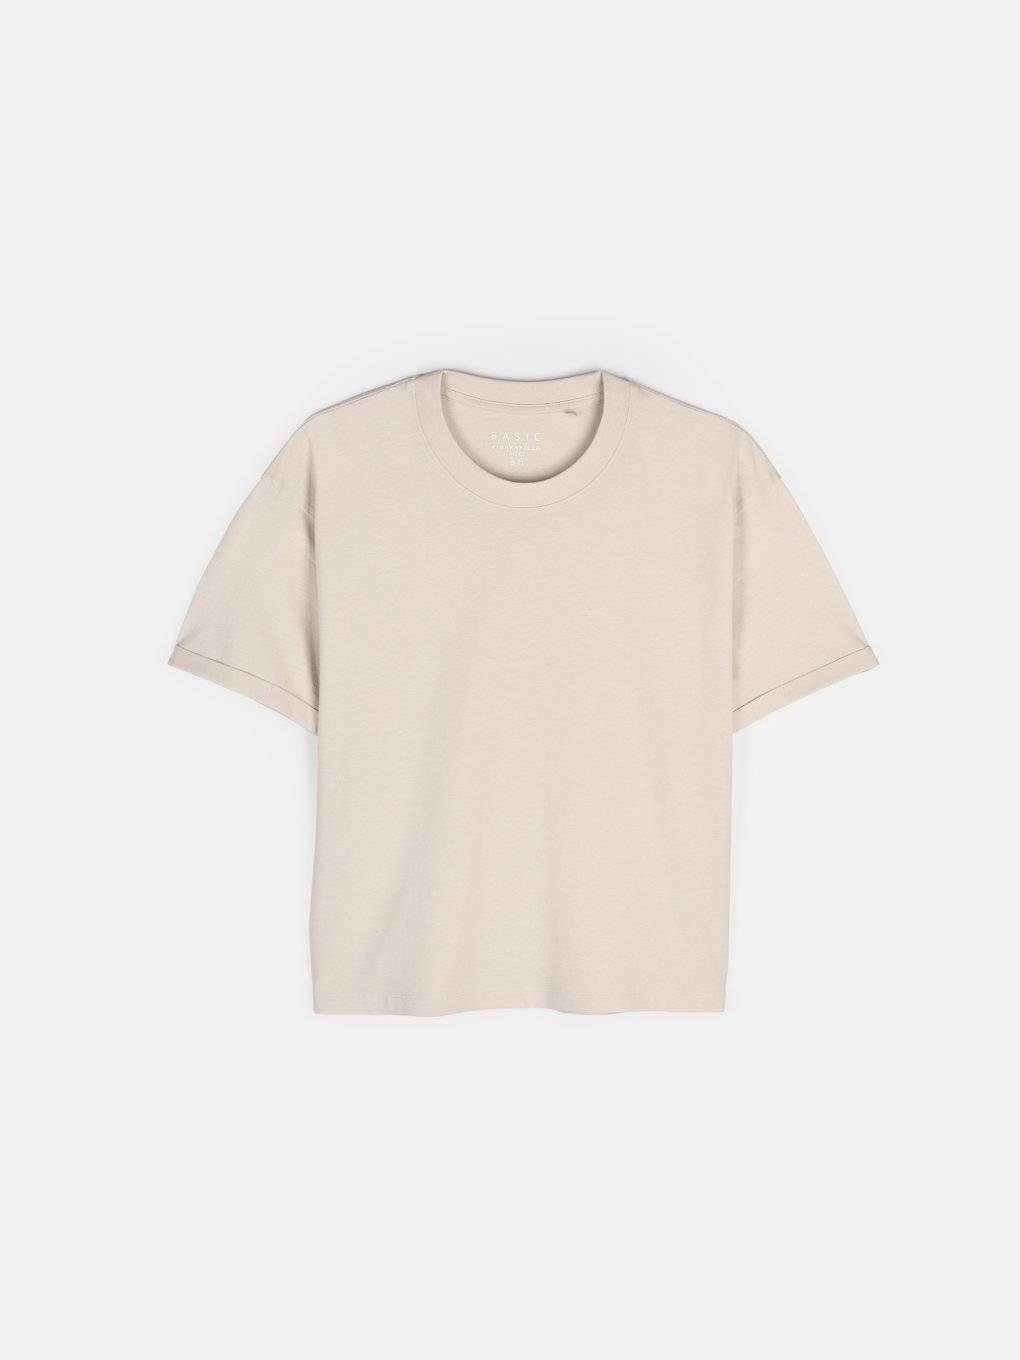 Basic t-shirt with short sleeves